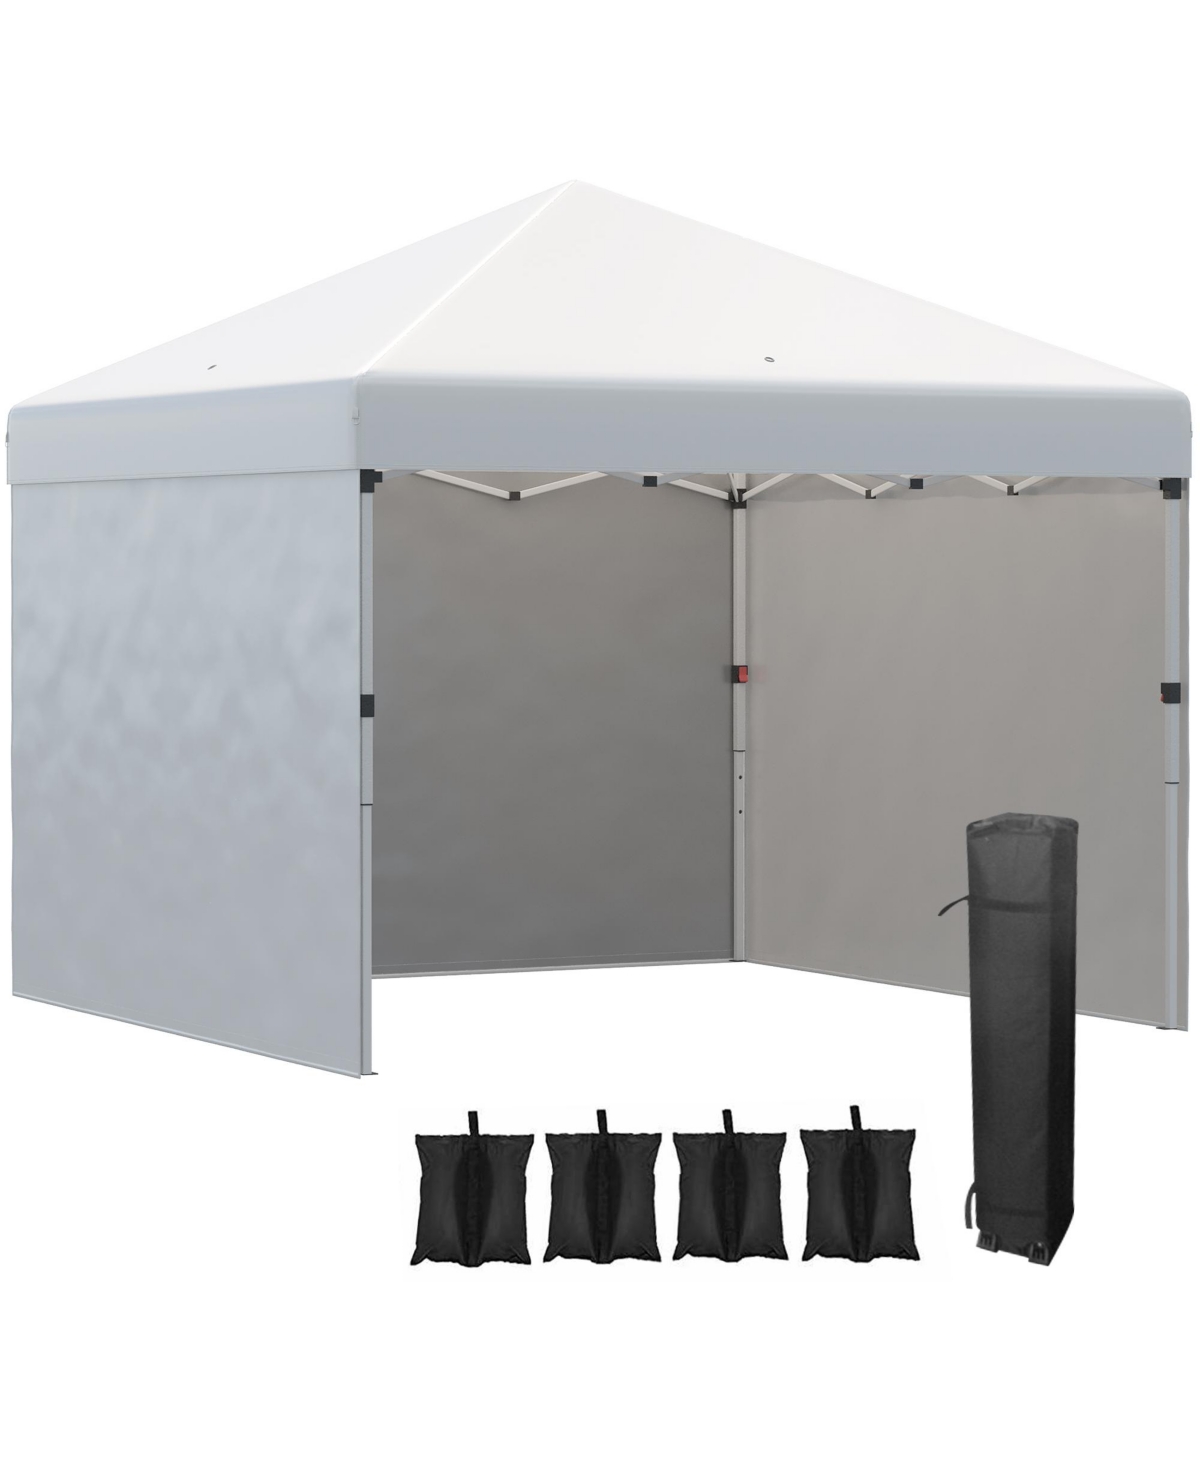 117" x 117" Pop Up Canopy Tent with 3 Sidewalls, Leg Weight Bags and Carry Bag, Height Adjustable Party Tent Event Shelter Gazebo for Garden,